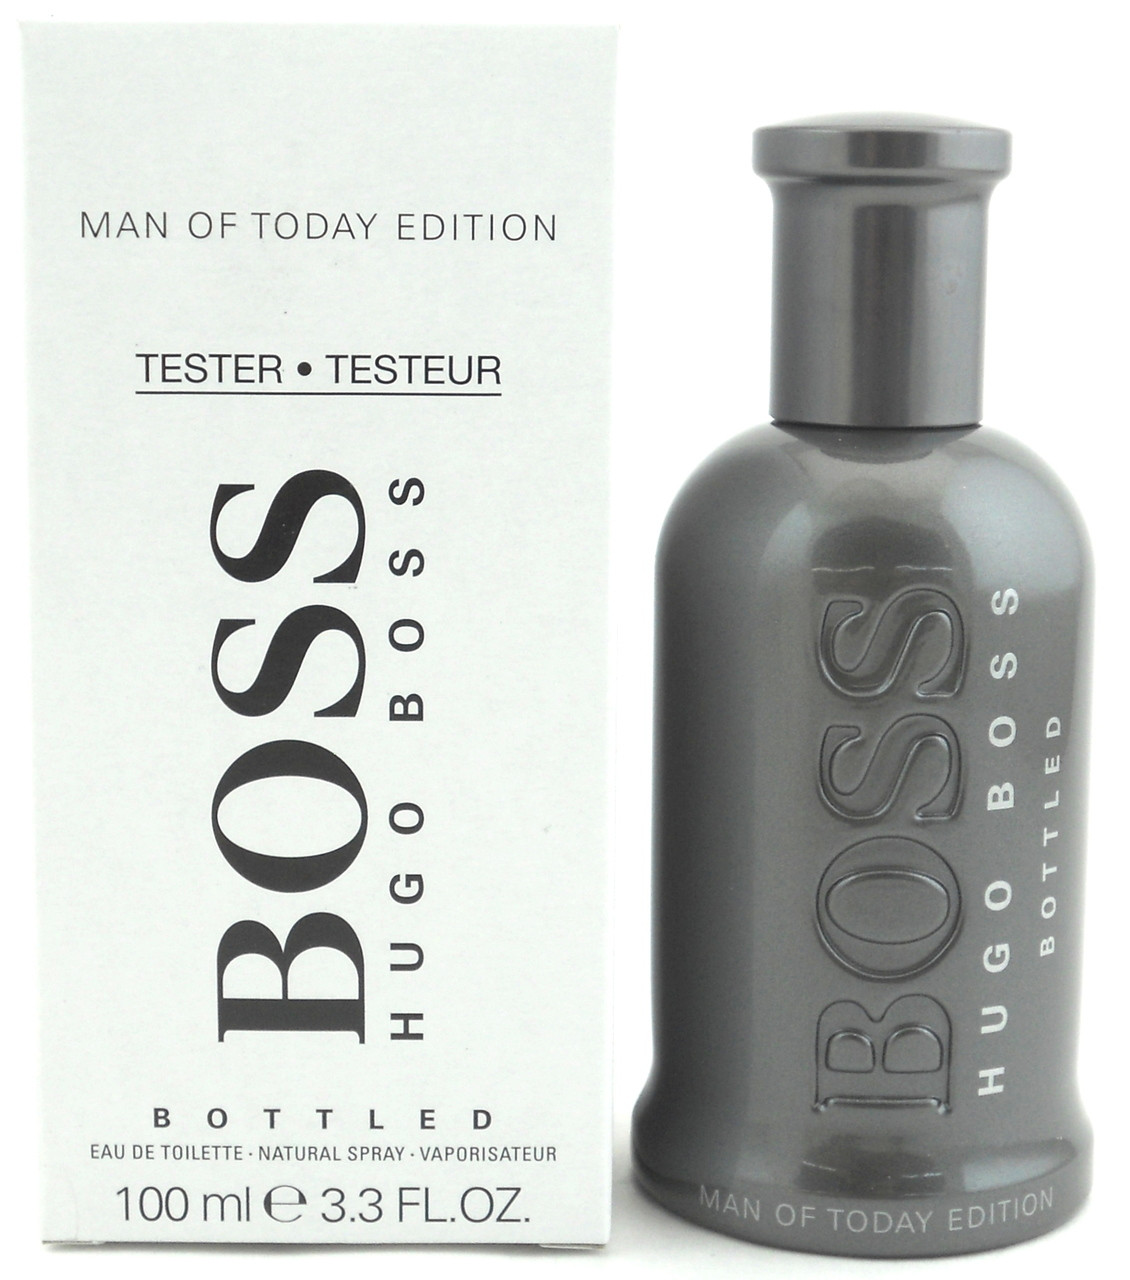 Boss Bottled Man of Today Edition by Hugo Boss 3.3 oz. EDT Spray Tester  with Cap. - eDiscountPerfumes.com -FREE SHIPPING* From An Independent  Seller of 100% Authentic Brands Since 2006 (*standard shipping to 48 states)